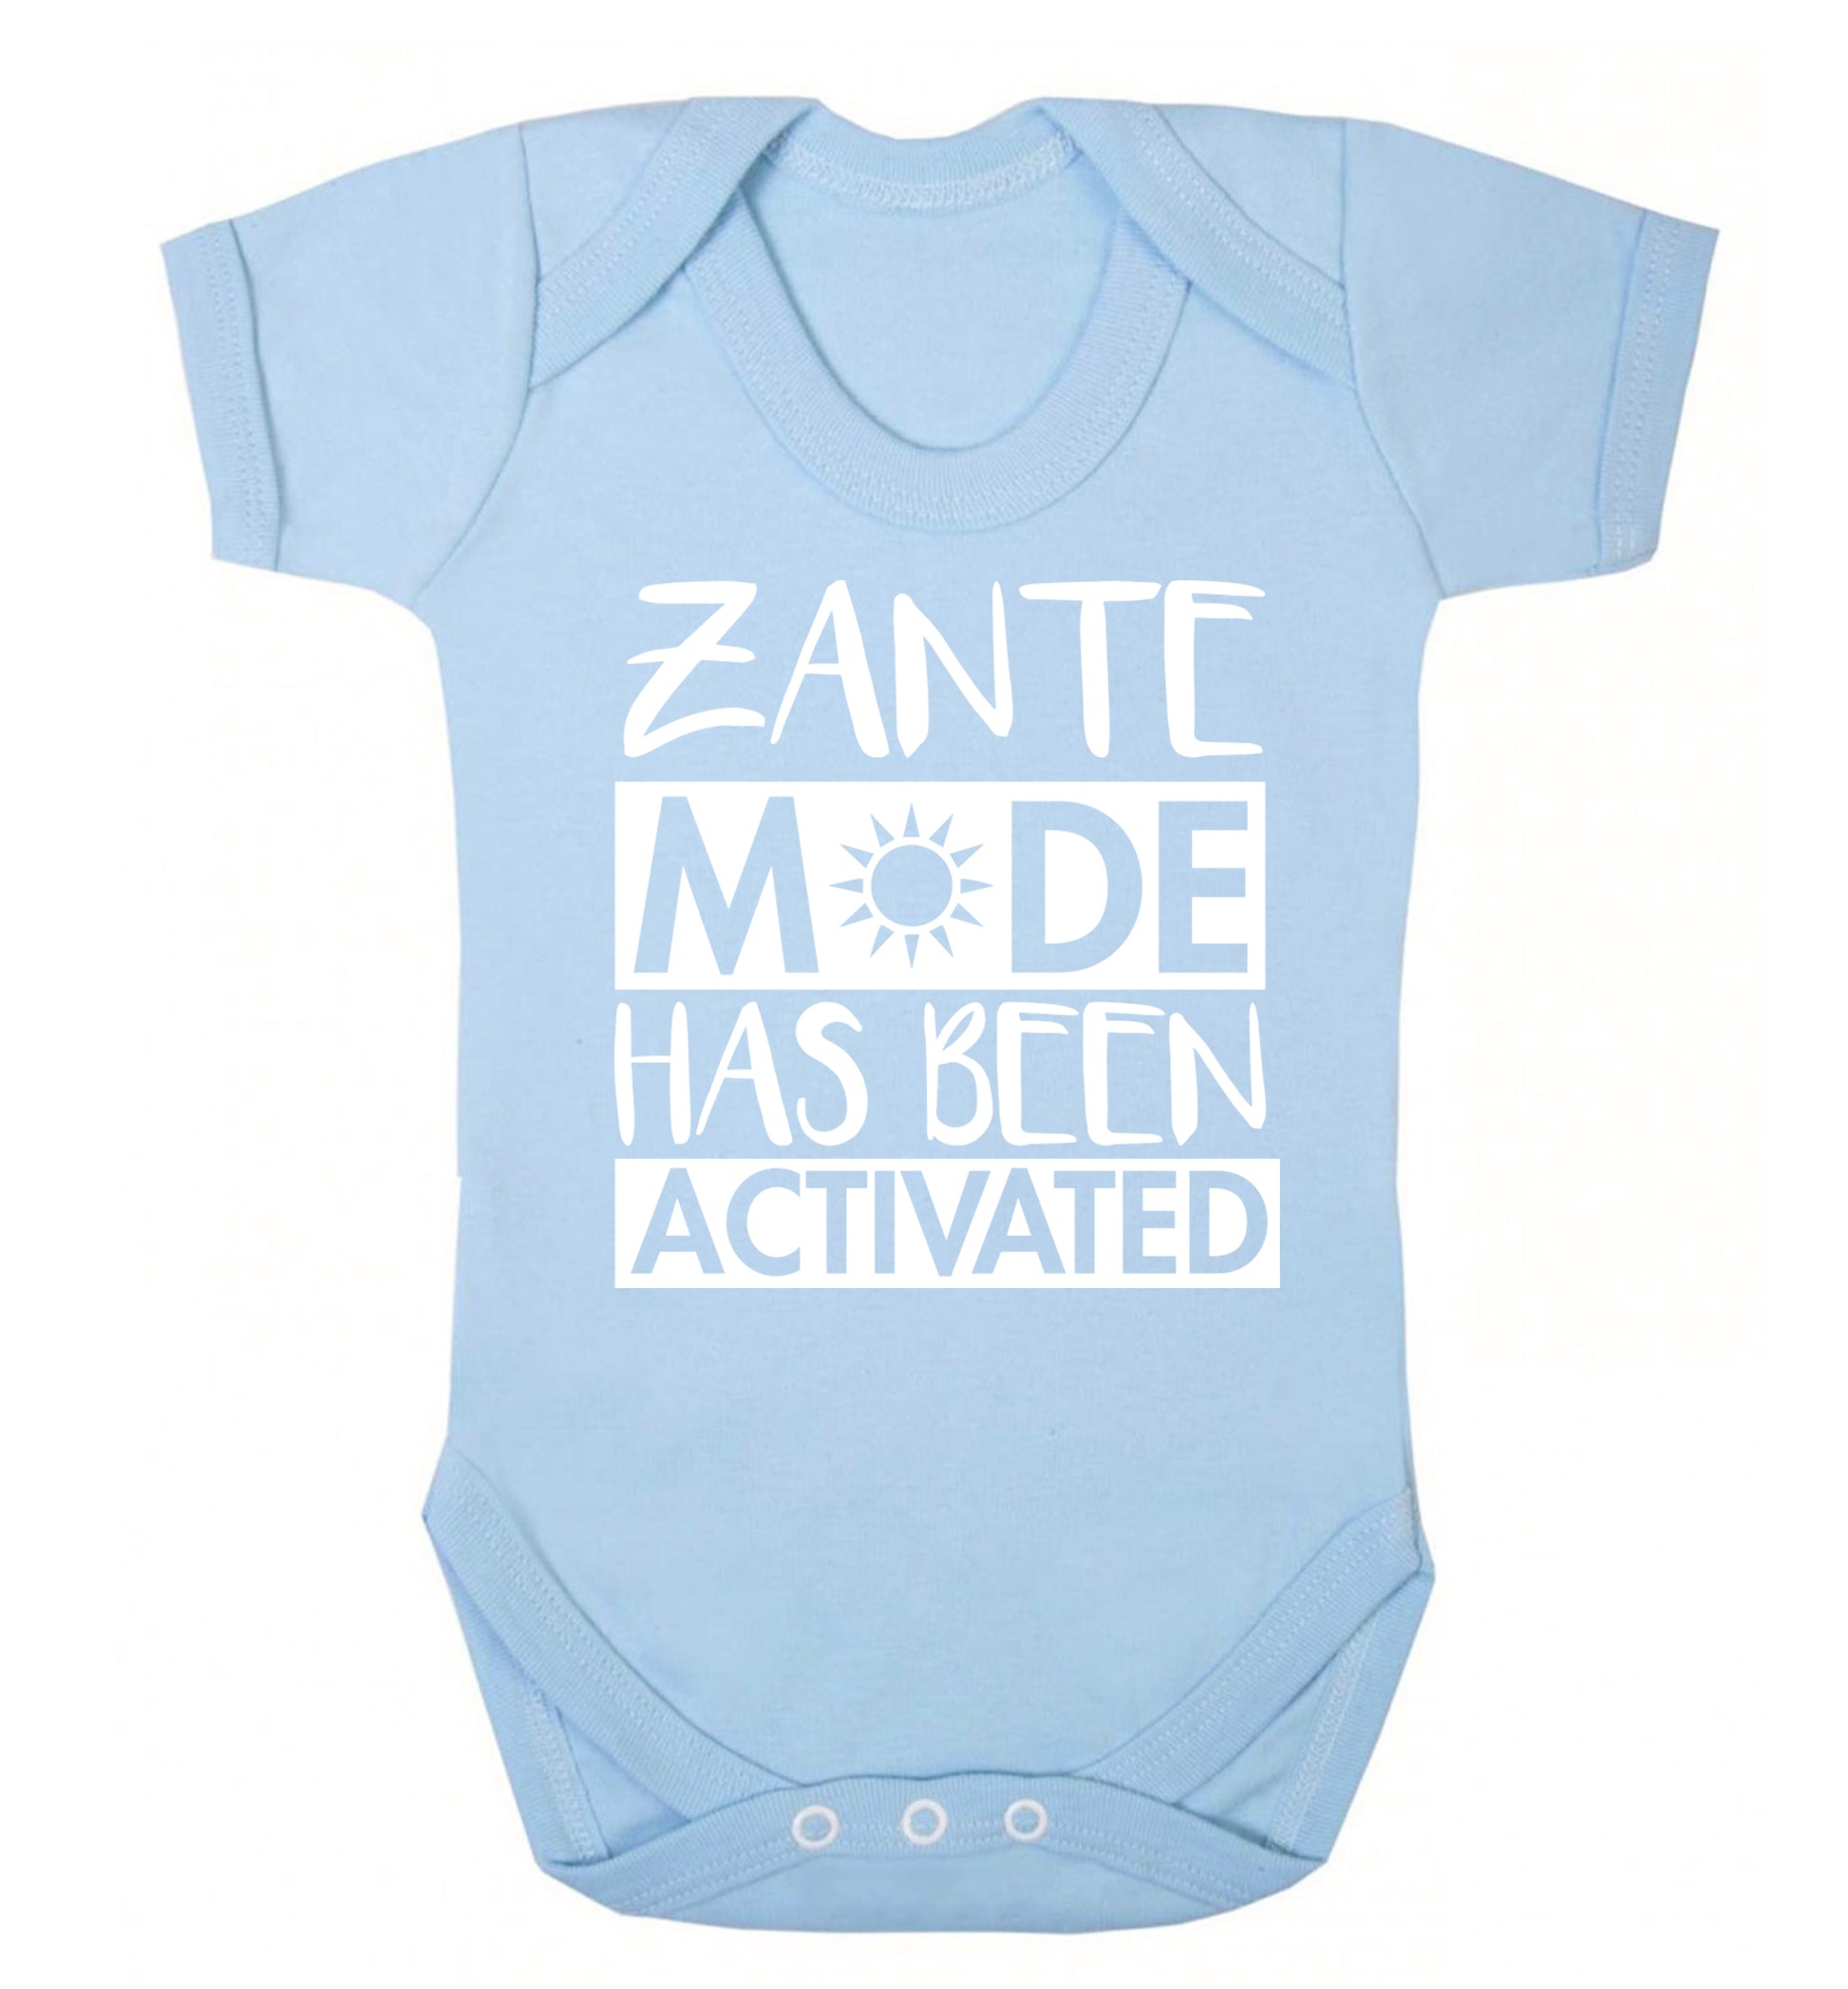 Zante mode has been activated Baby Vest pale blue 18-24 months